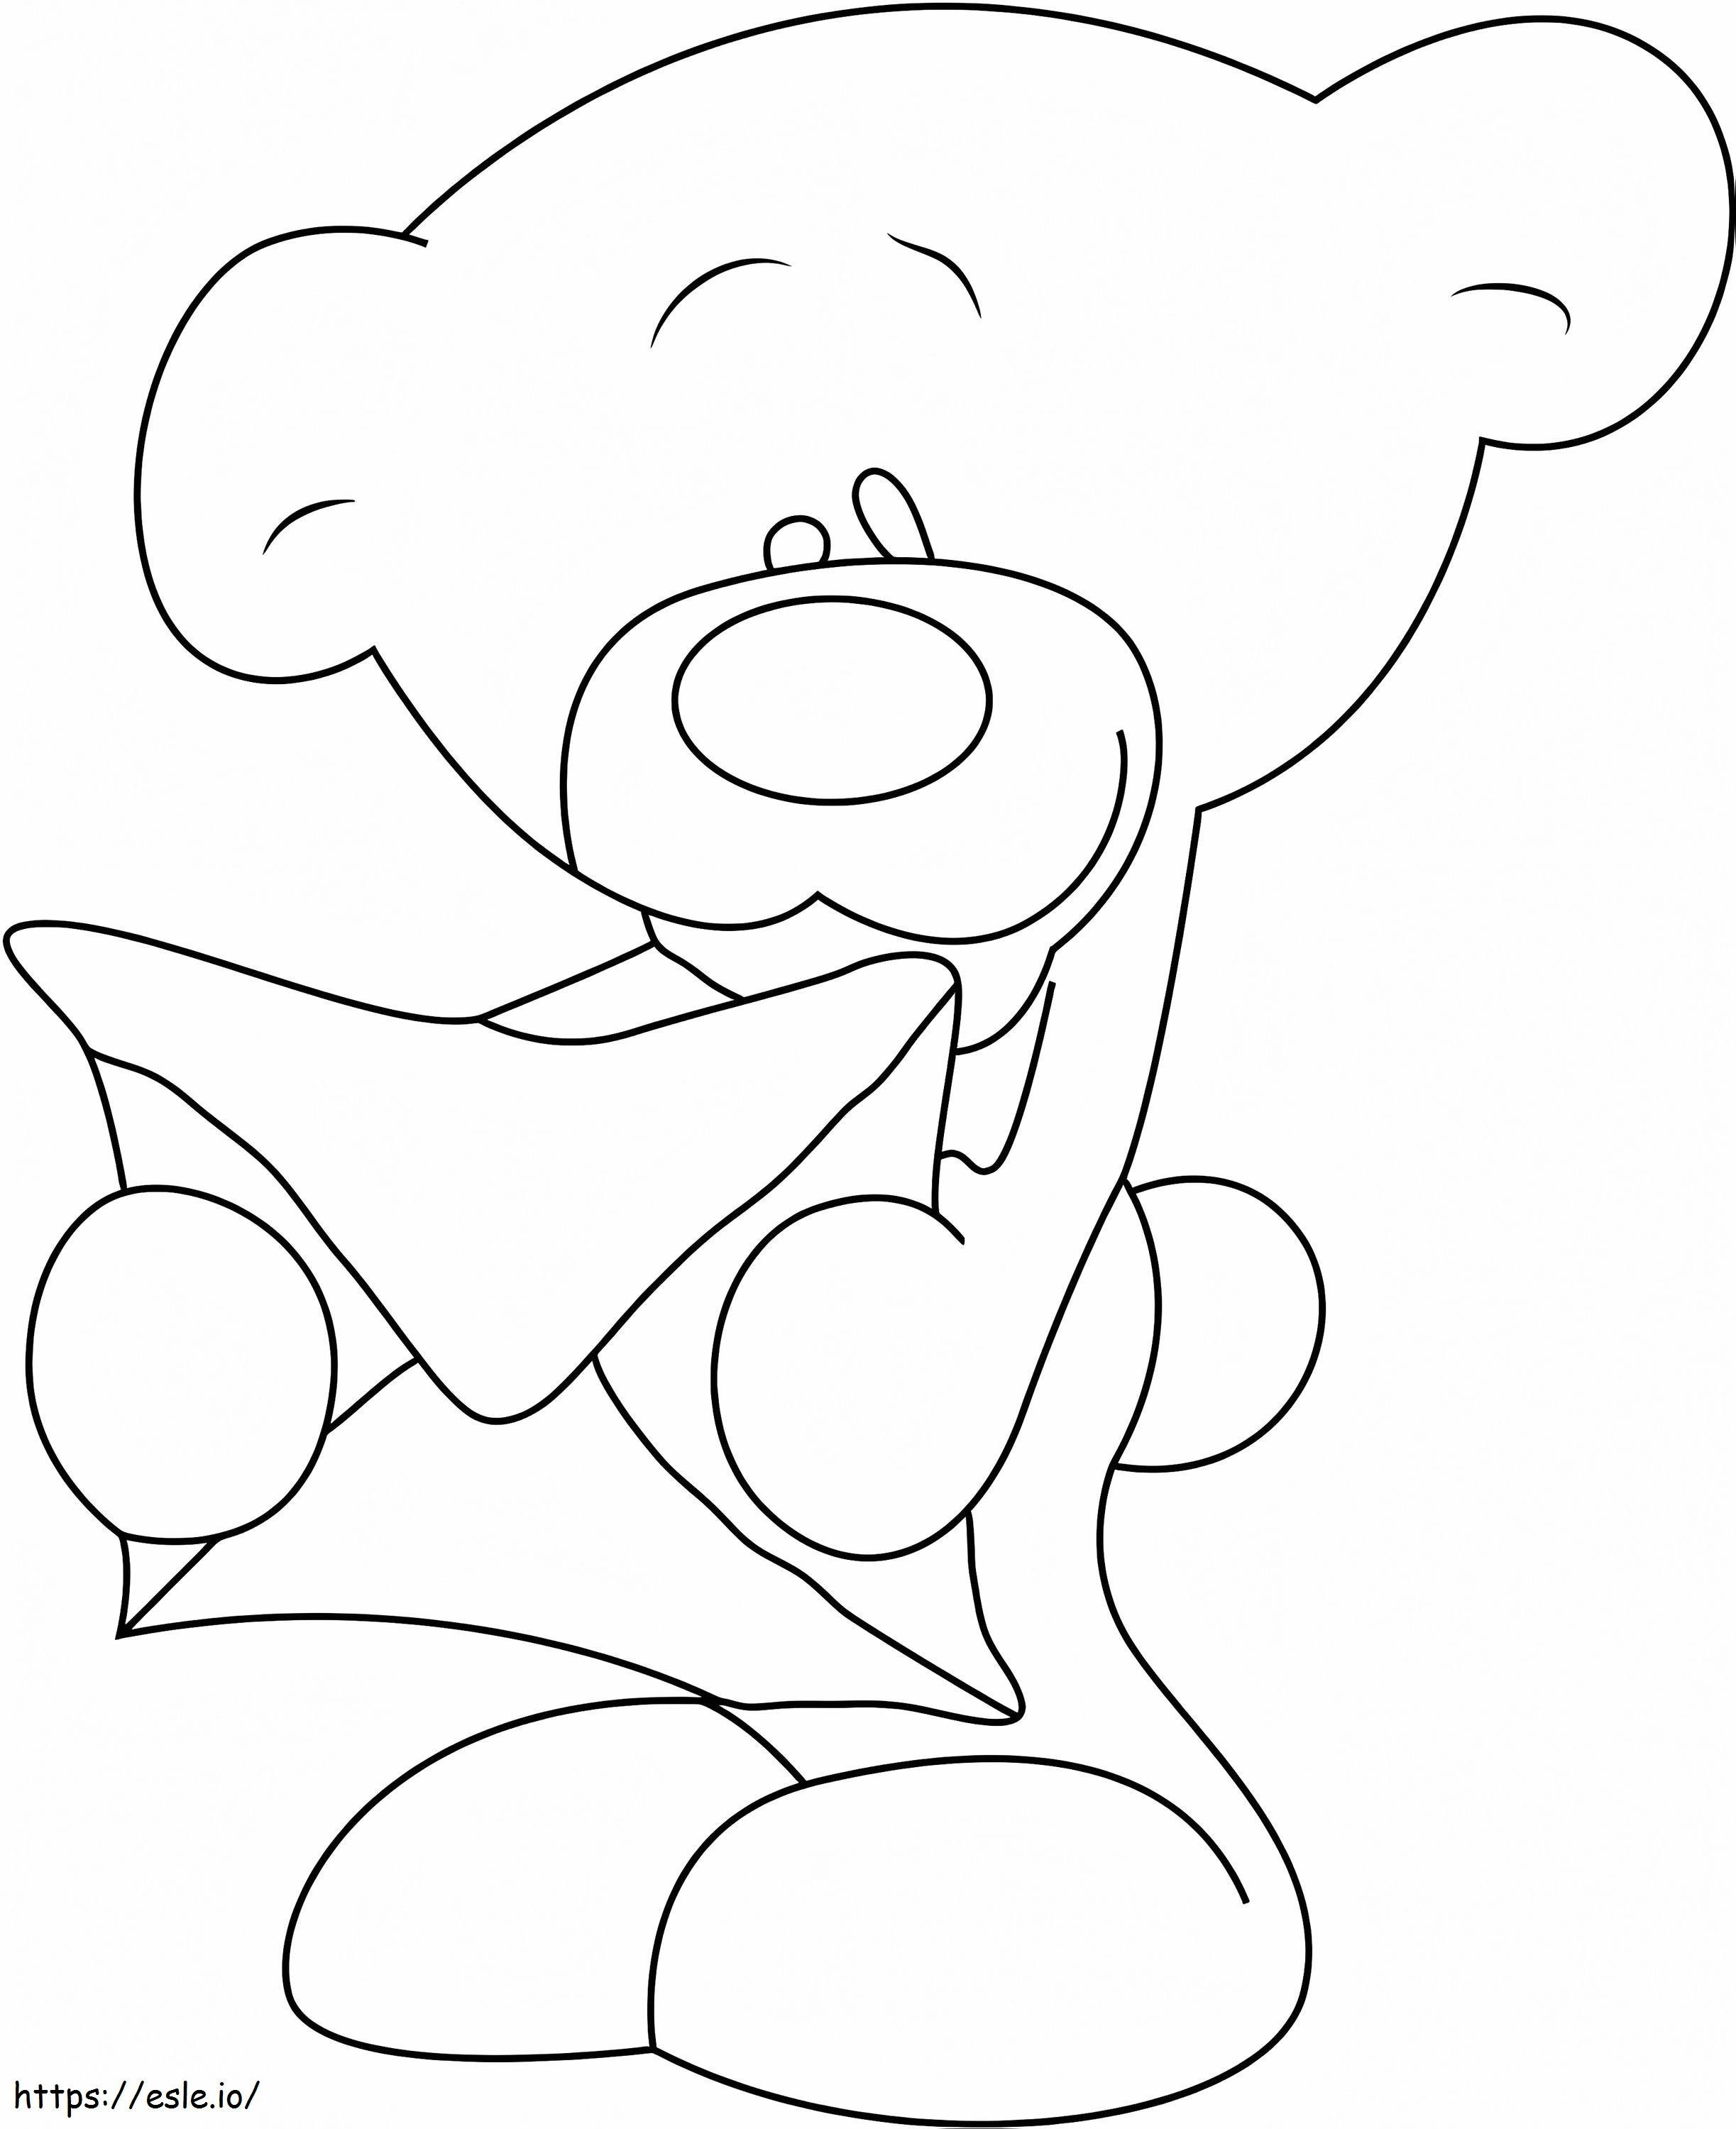 Pimboli And Letter coloring page